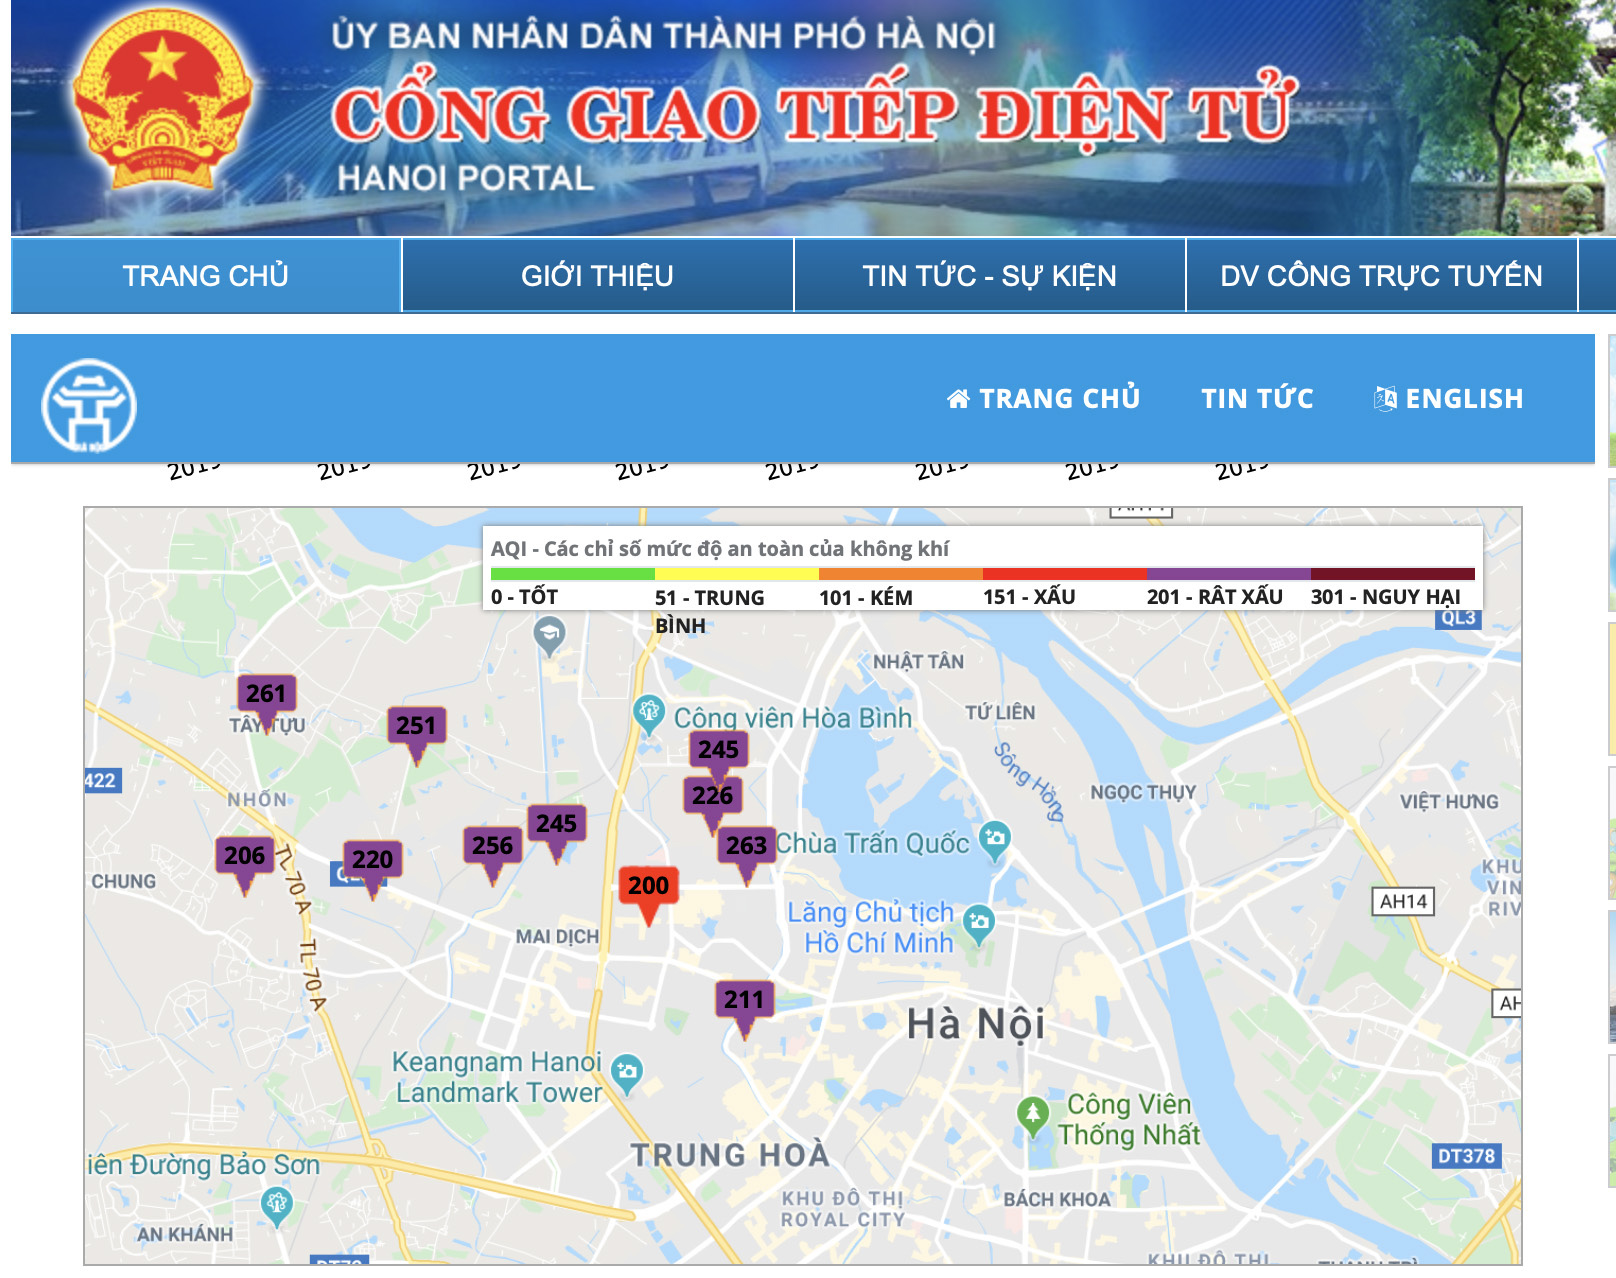 Authorities remain silent amidst terrible air pollution in Hanoi